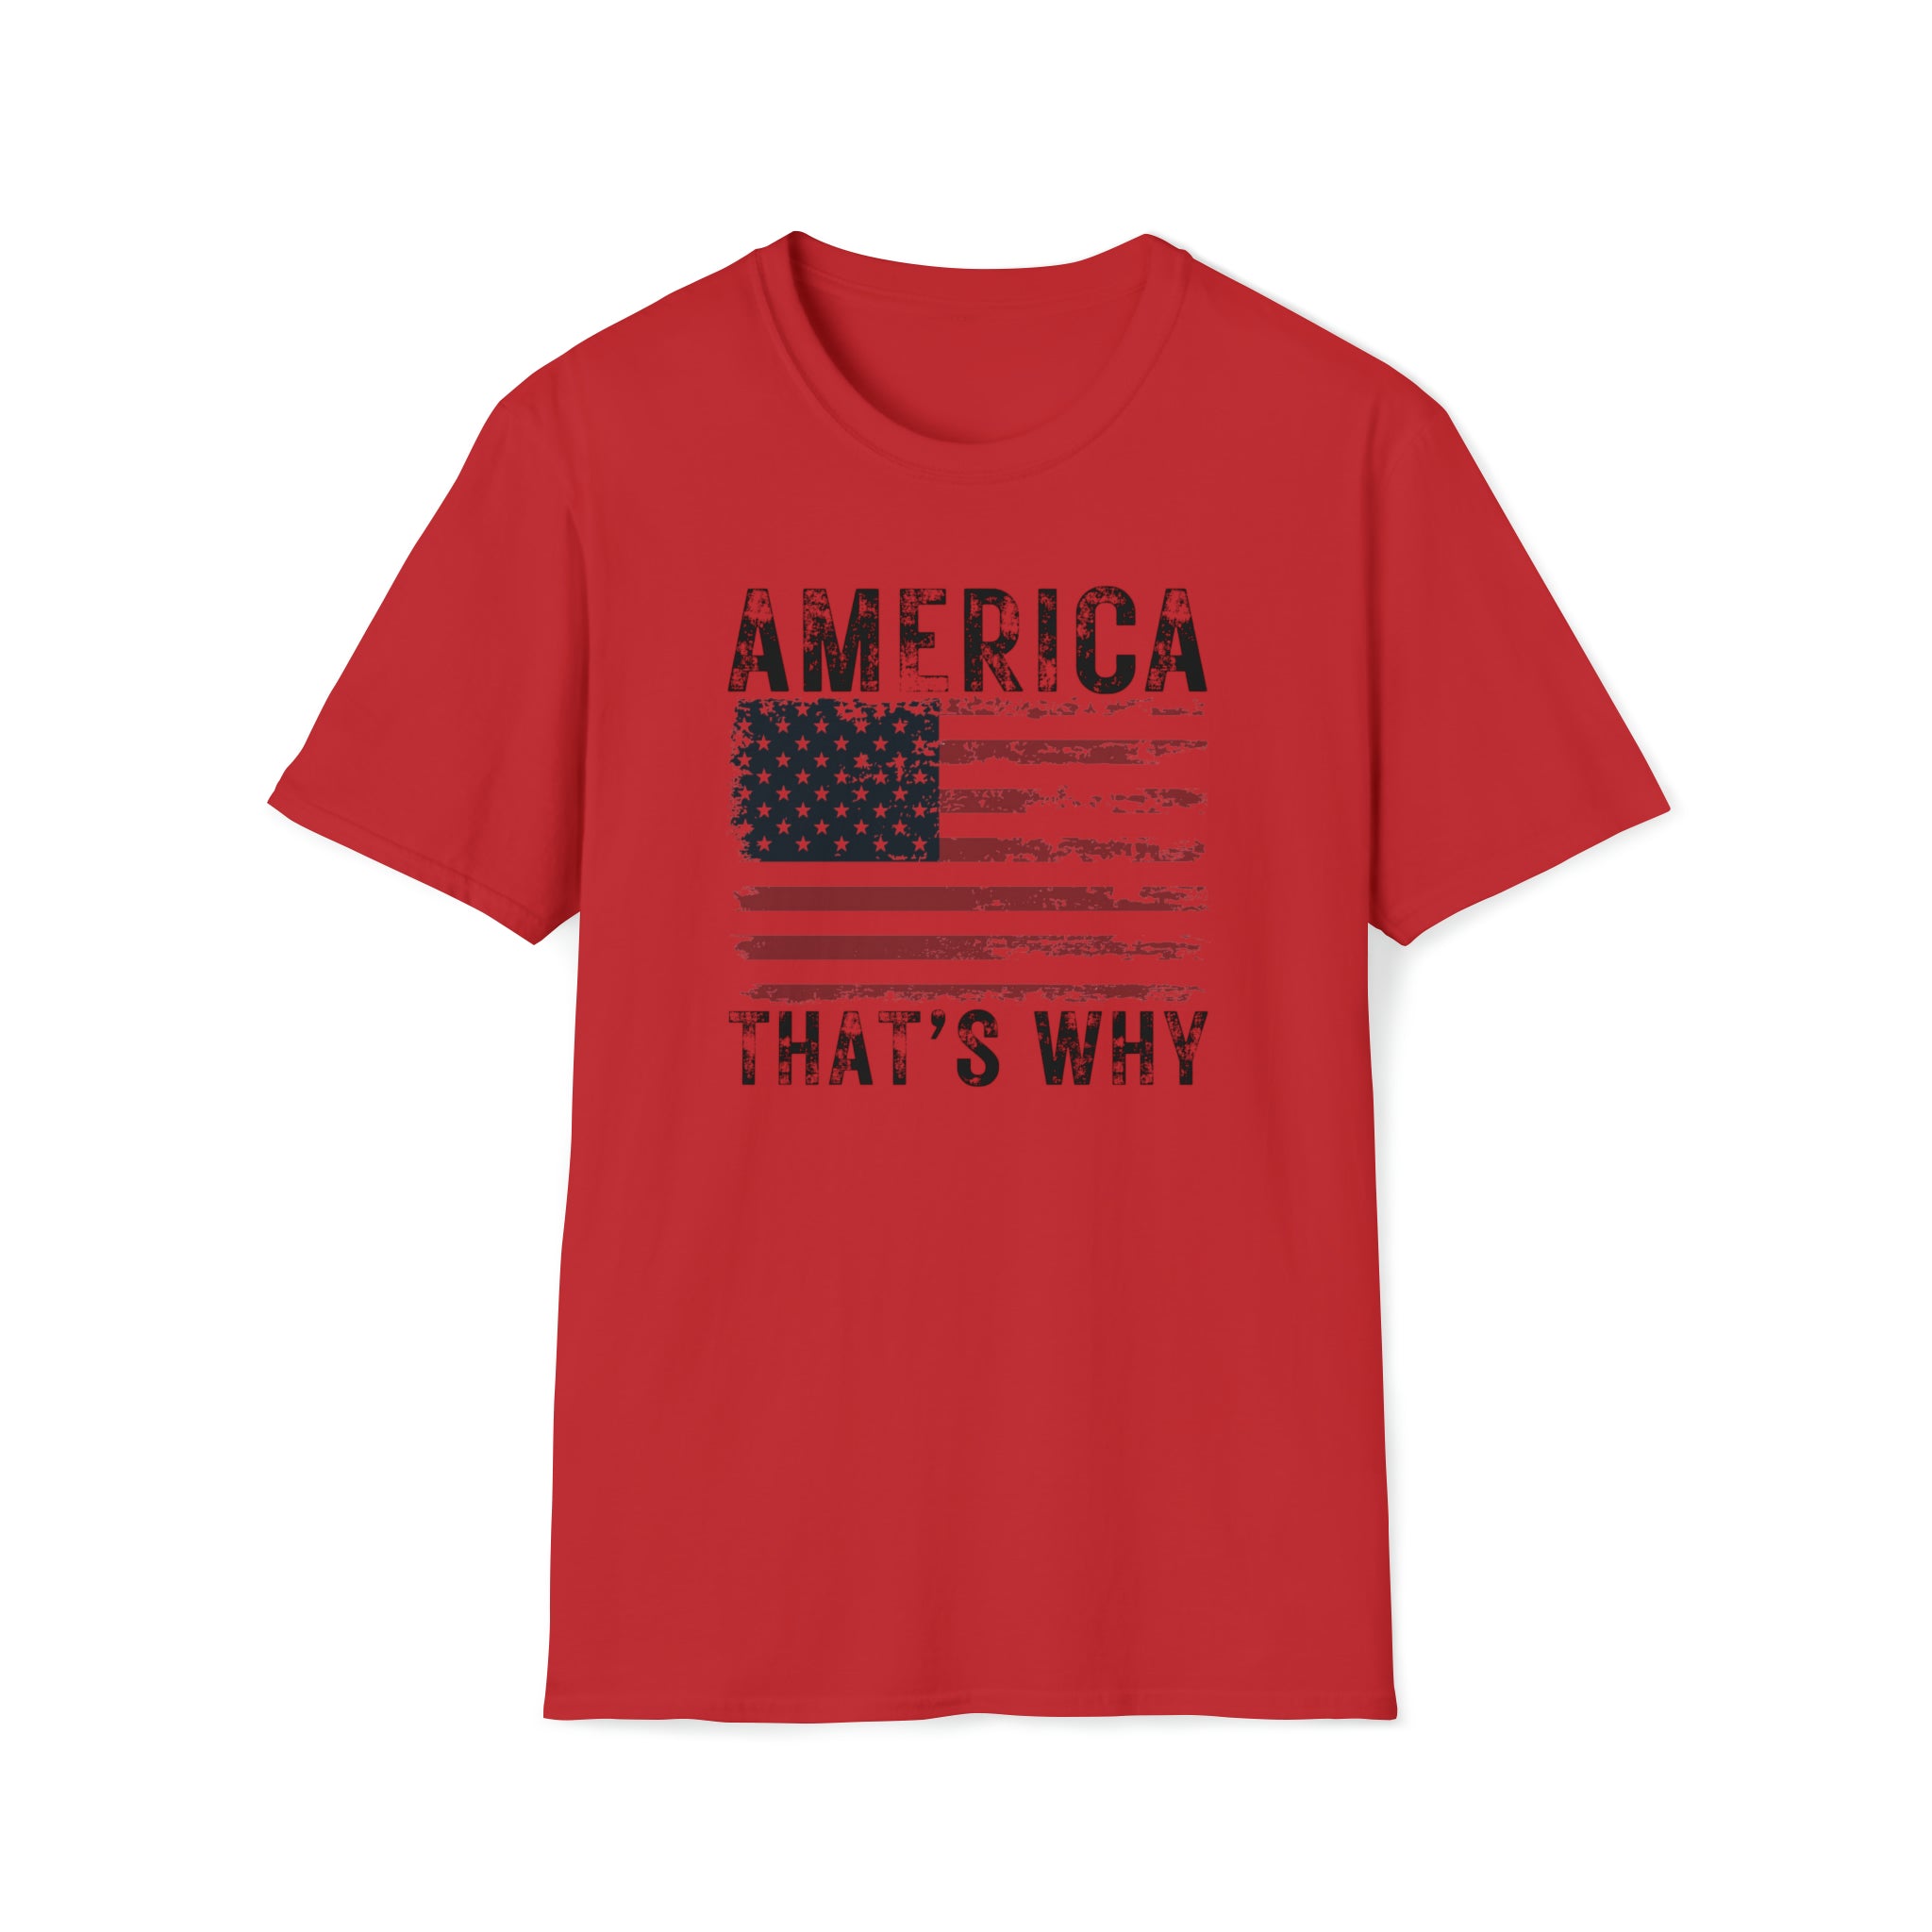 America That's Why T-Shirt